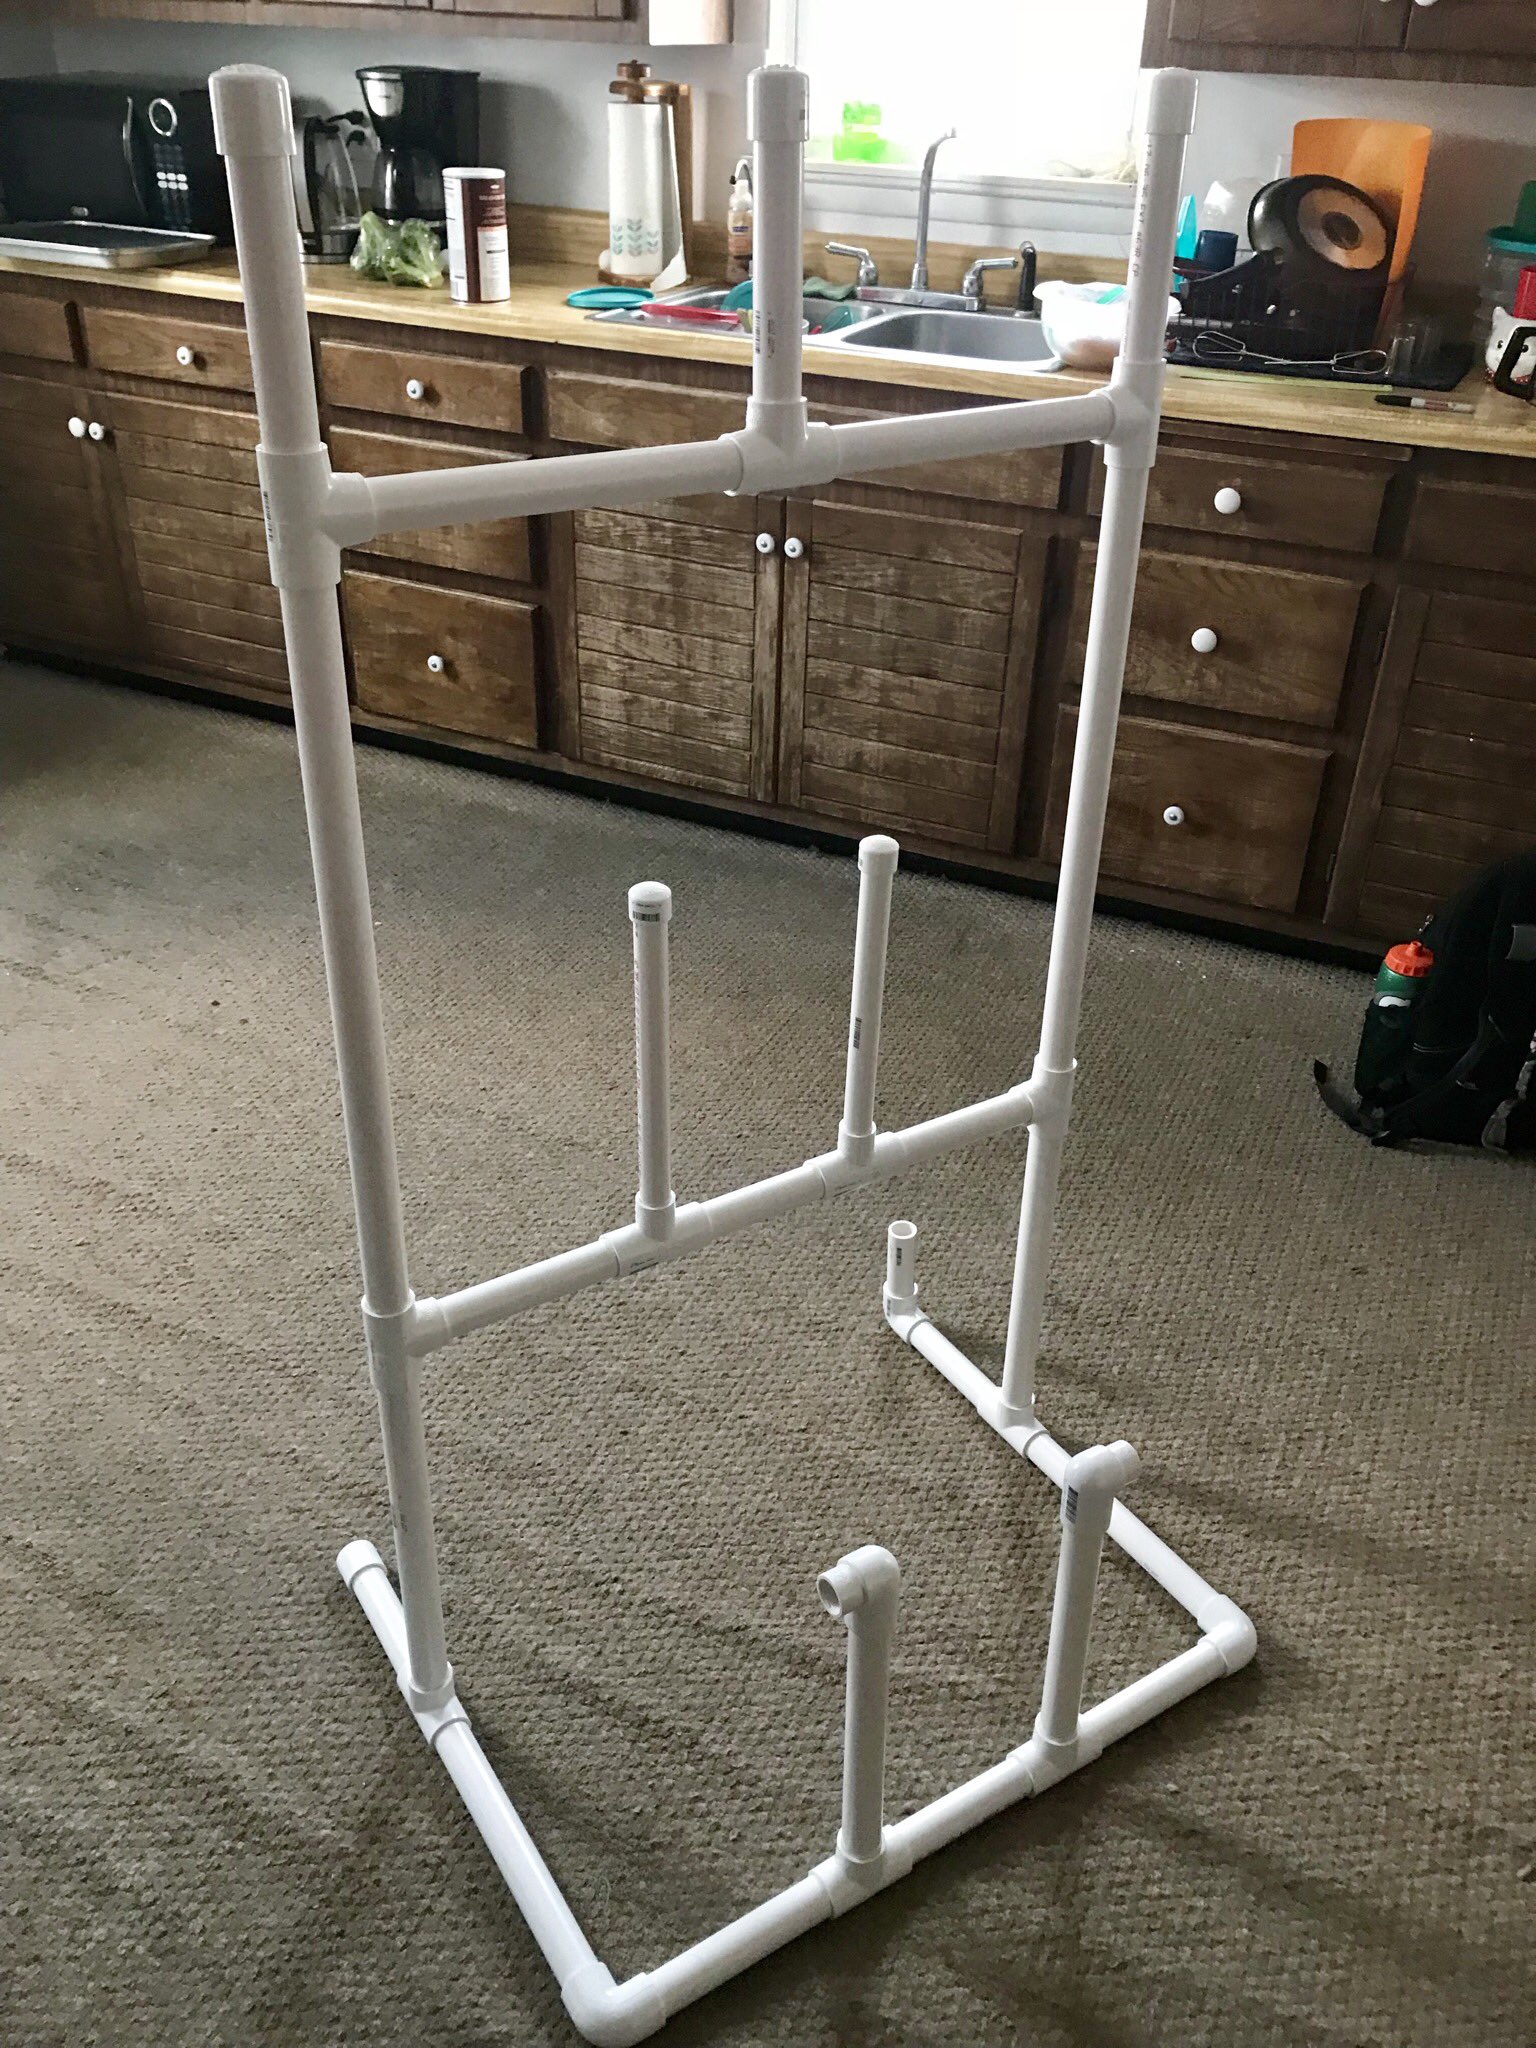 Kristin Lewandoski on X: Built a hockey gear drying rack today. Guess I  have learned something at school🤷🏻‍♀️  / X